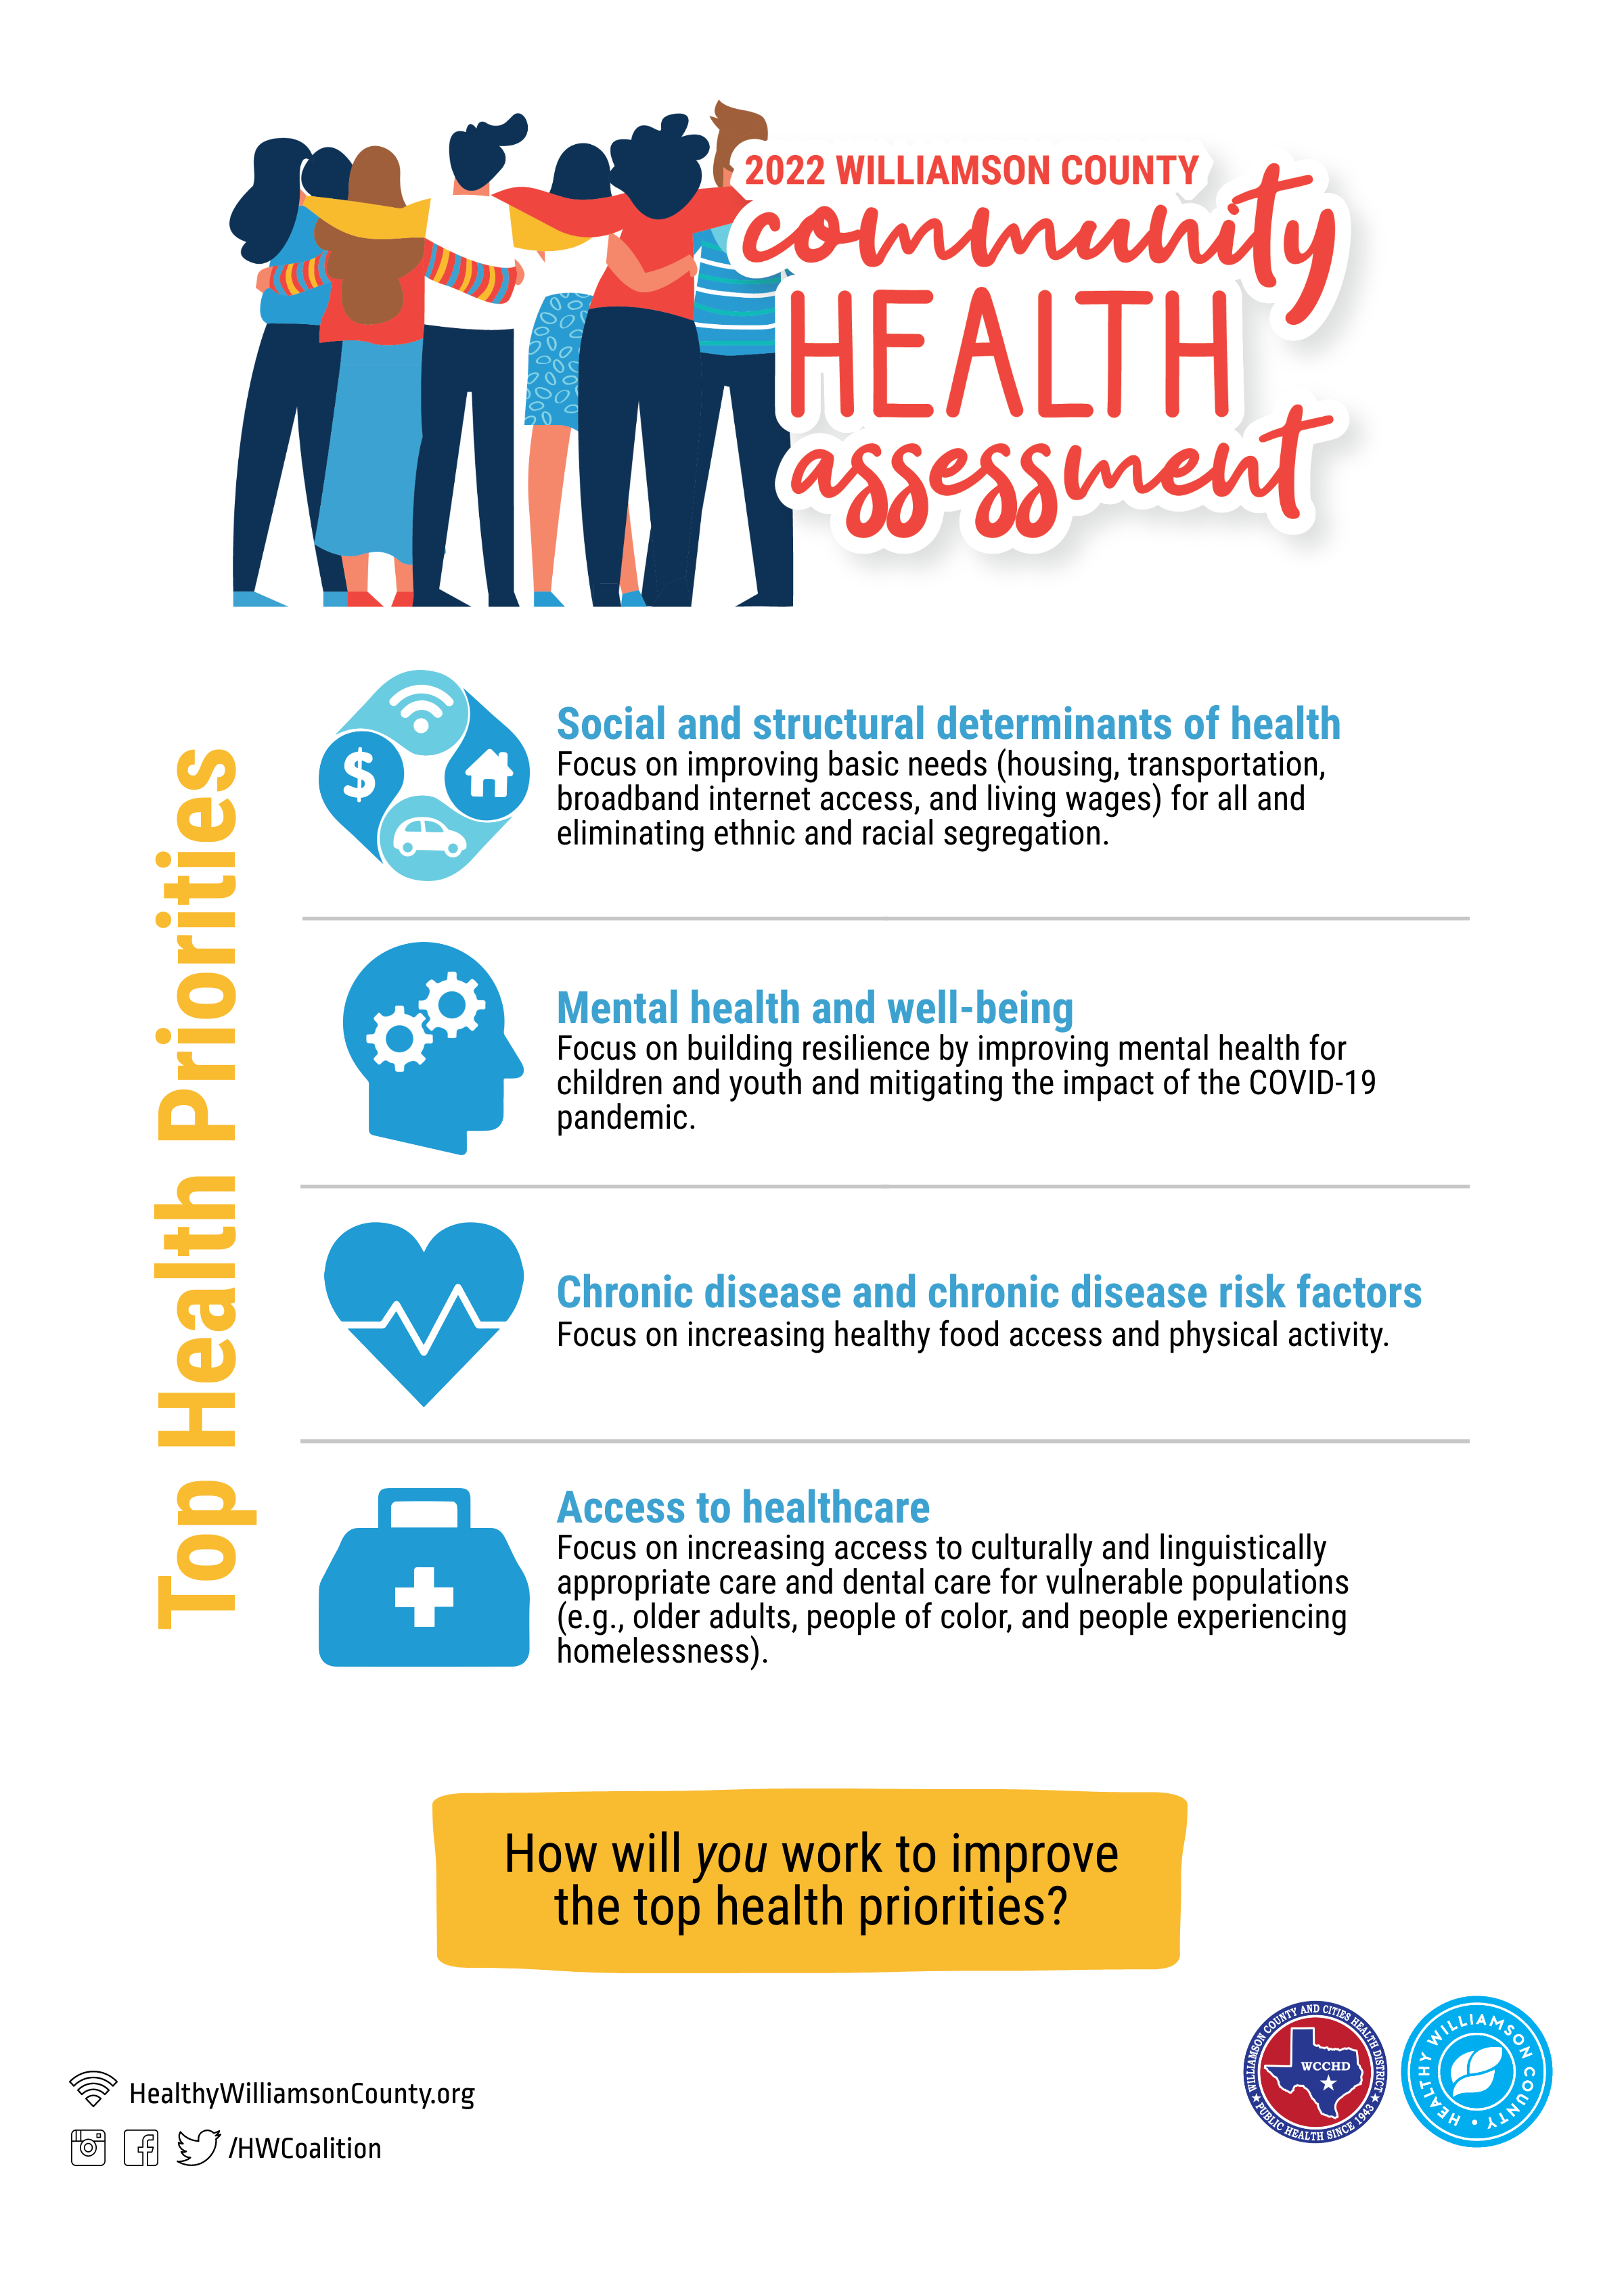 2022 Williamson County Community Health Assessment Top Health Priorities Infographic